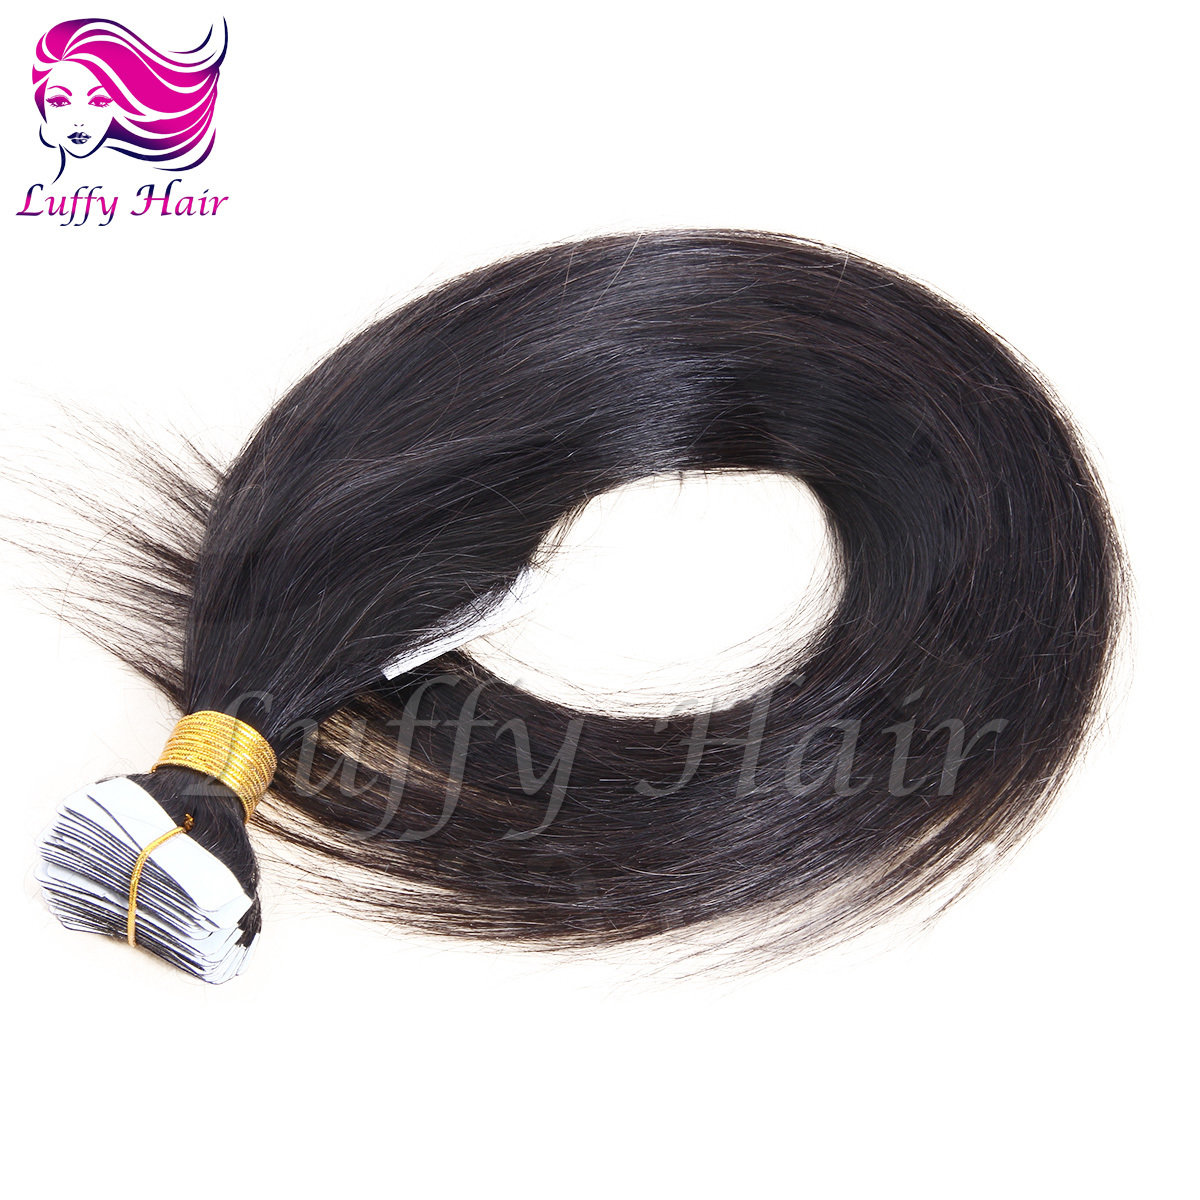 Silky Straight Tape In Hair Extensions - KTL001